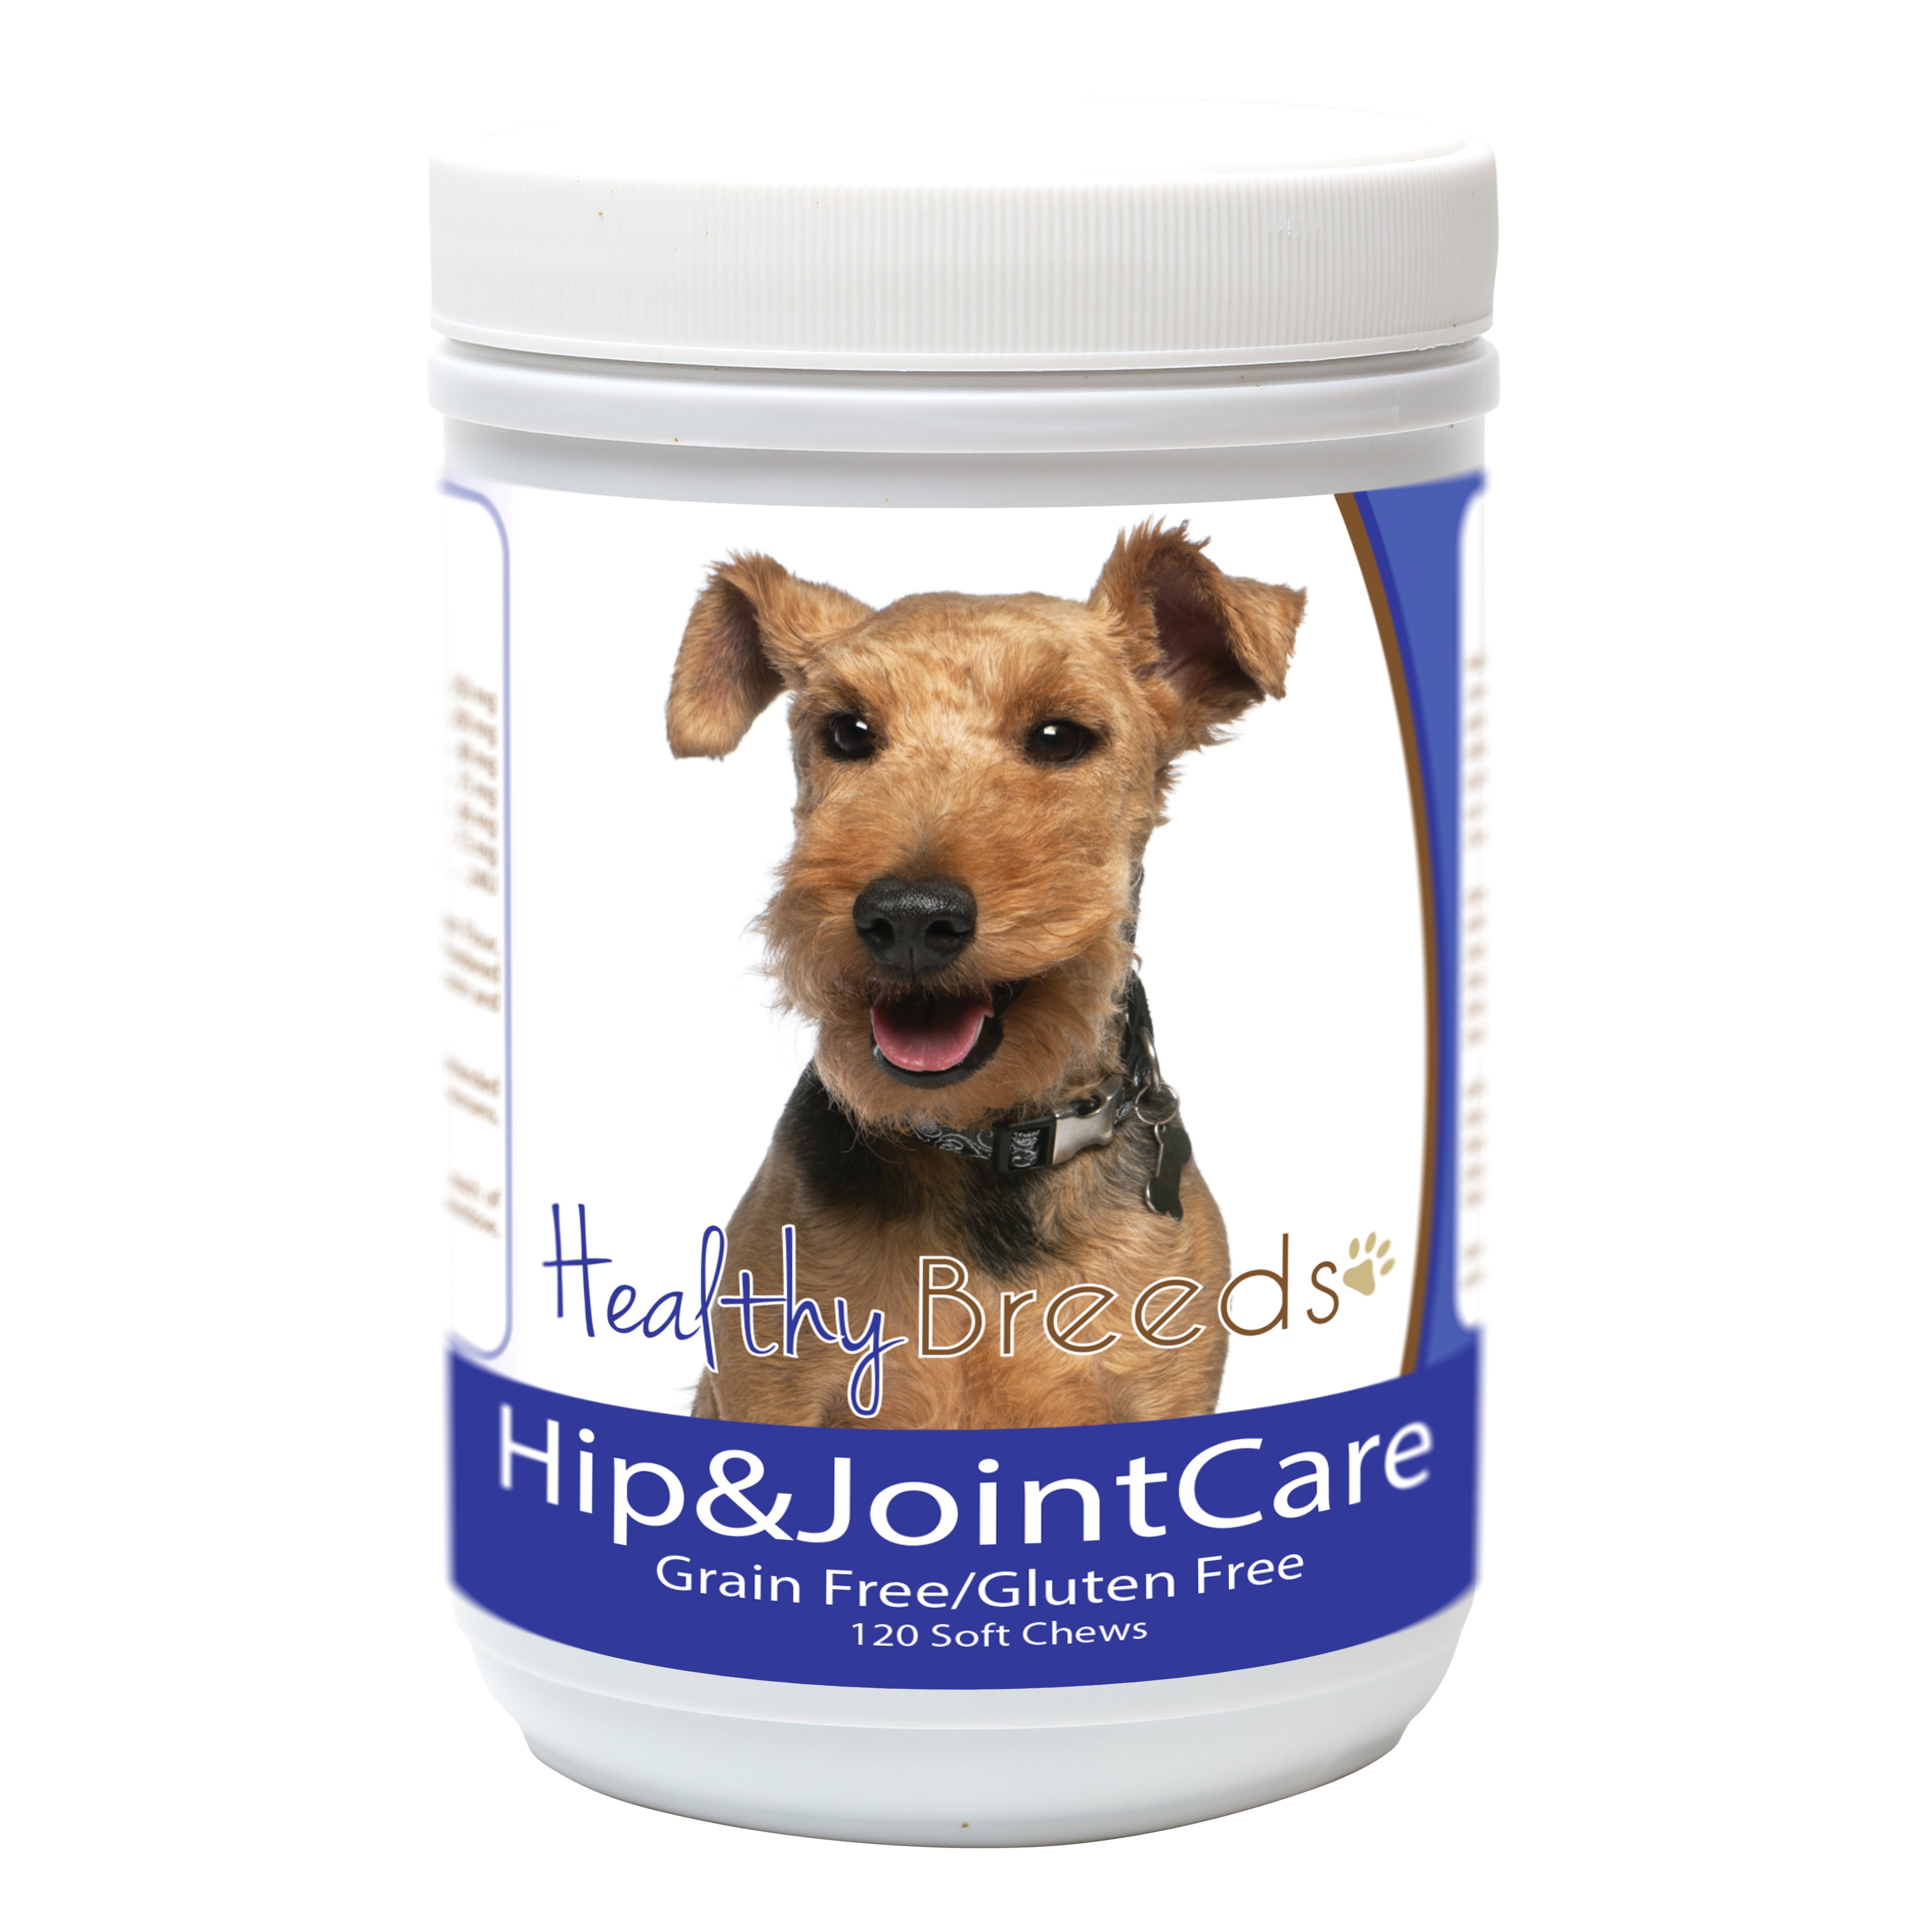 Welsh Terrier Hip and Joint Care 120 Count